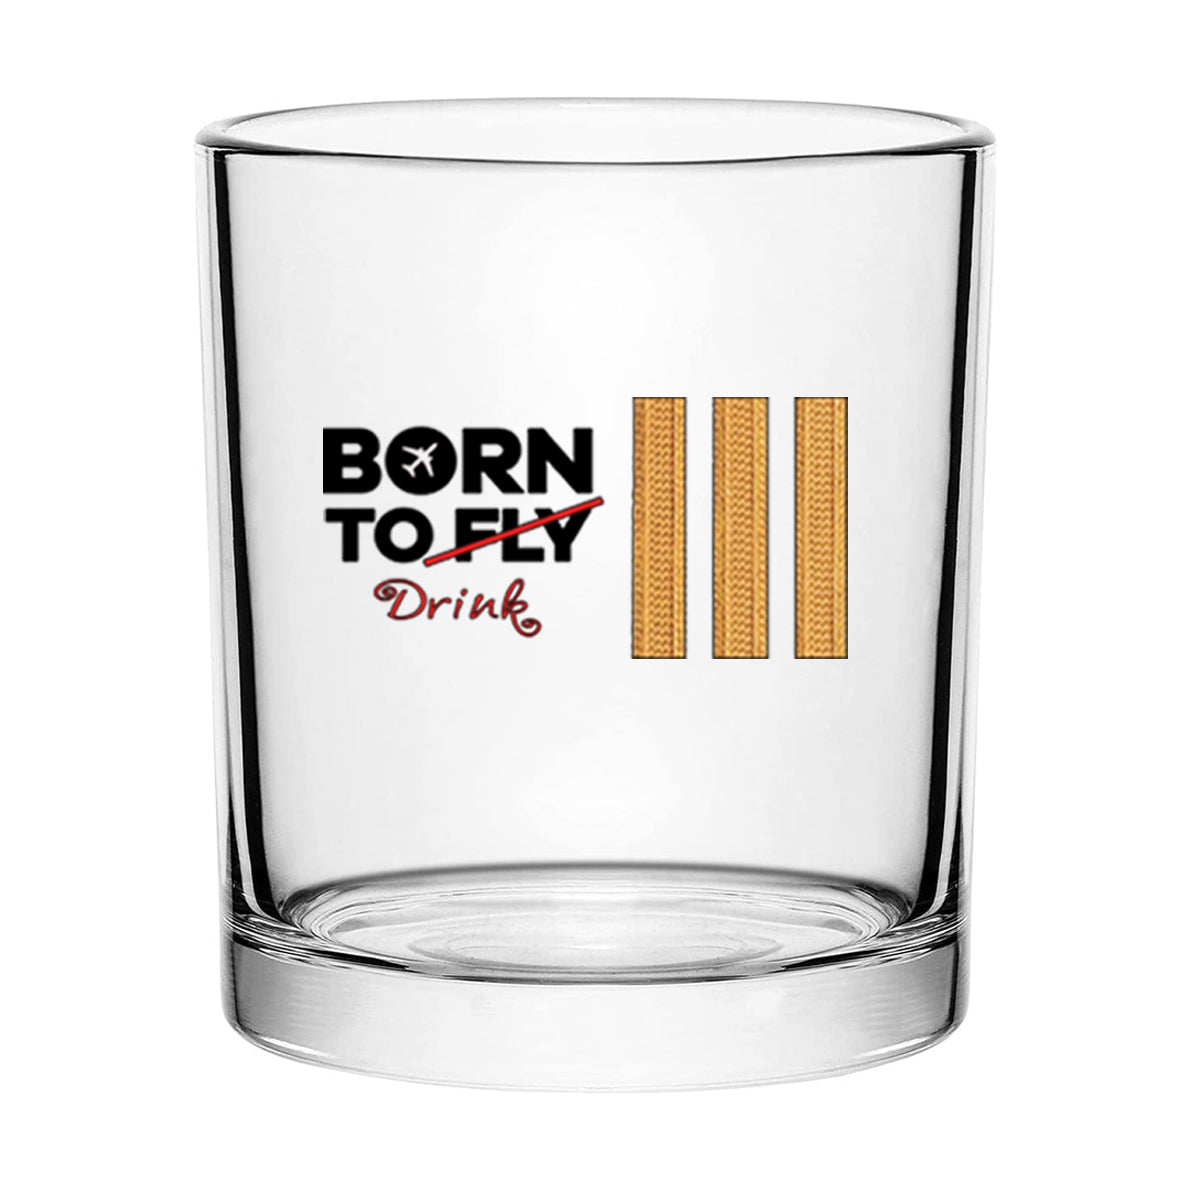 Born To Drink & 3 Lines Designed Special Whiskey Glasses